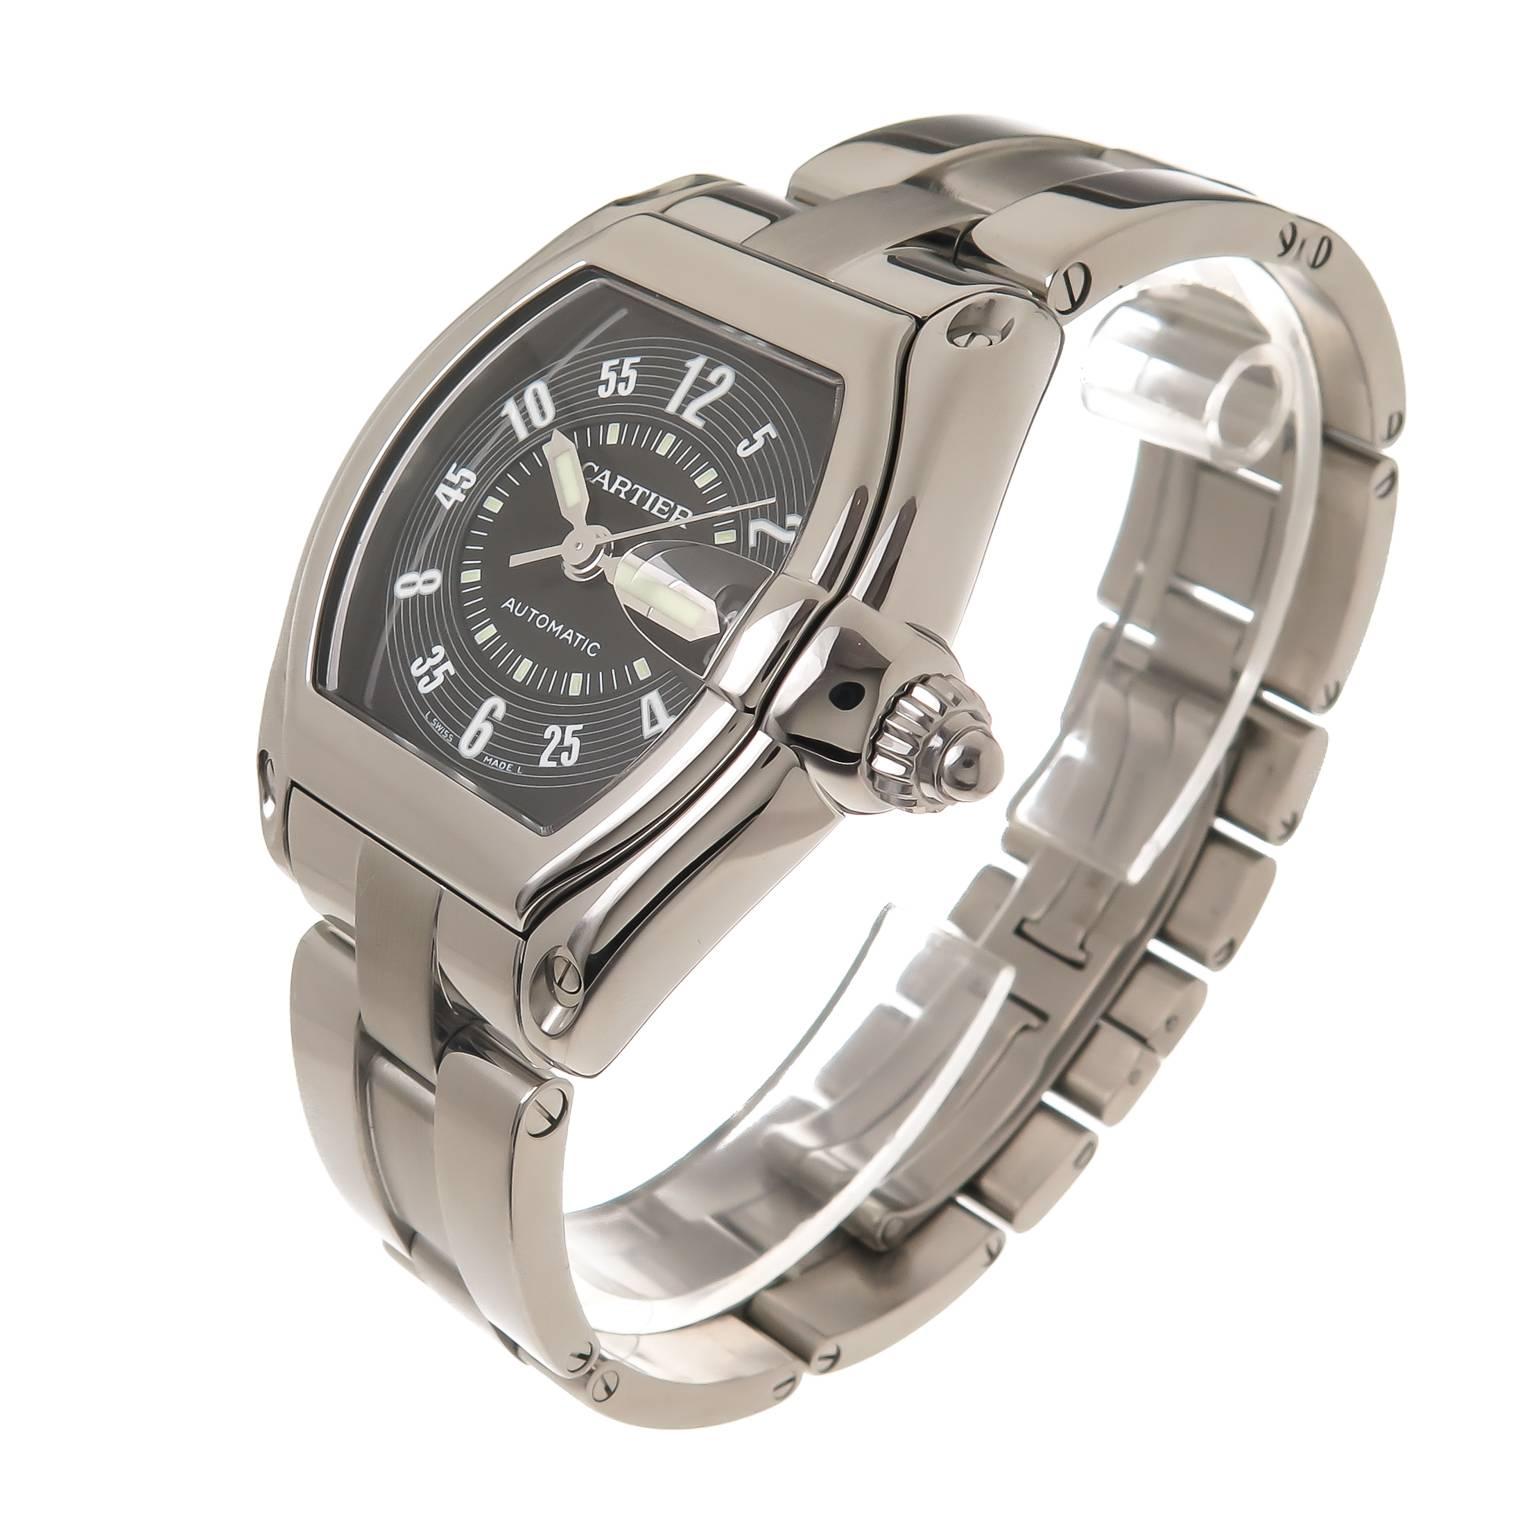 Circa 2010  Reference 2510 Cartier Roadster Large Size Stainless Steel 43 X 36 MM Water Resistant Case, 3/4 inch wide Steel bracelet having Brushed center links and a double fold over deployment clasp. total length 7 1/2 inch. Automatic, self